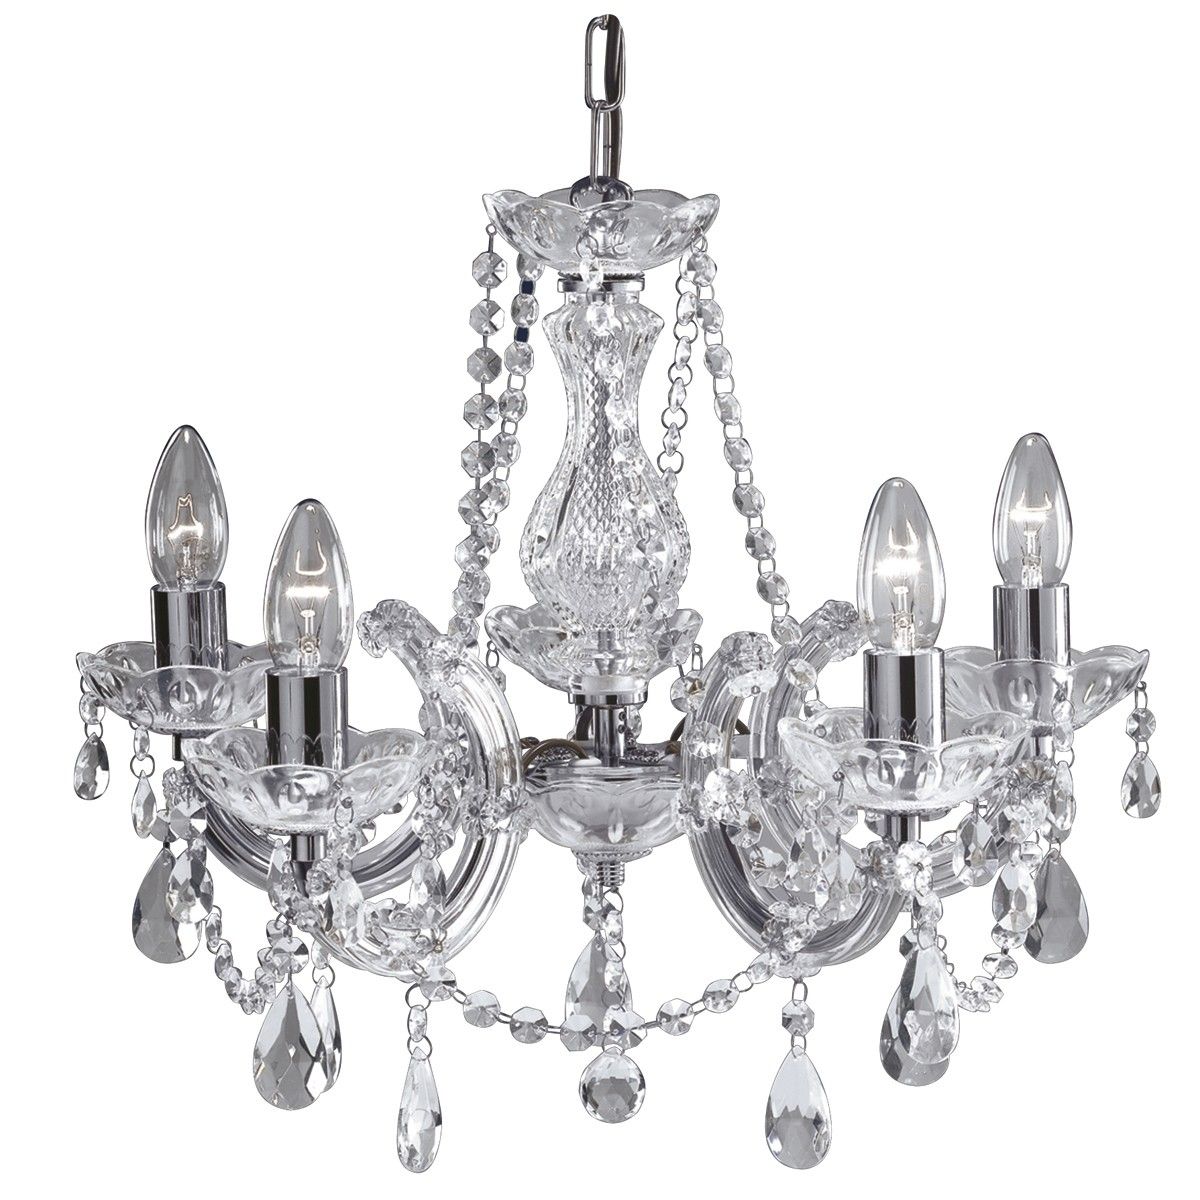 Therese Chrome 5 Light Chandelier With Crystal Drops In Chandelier Chrome (View 13 of 15)